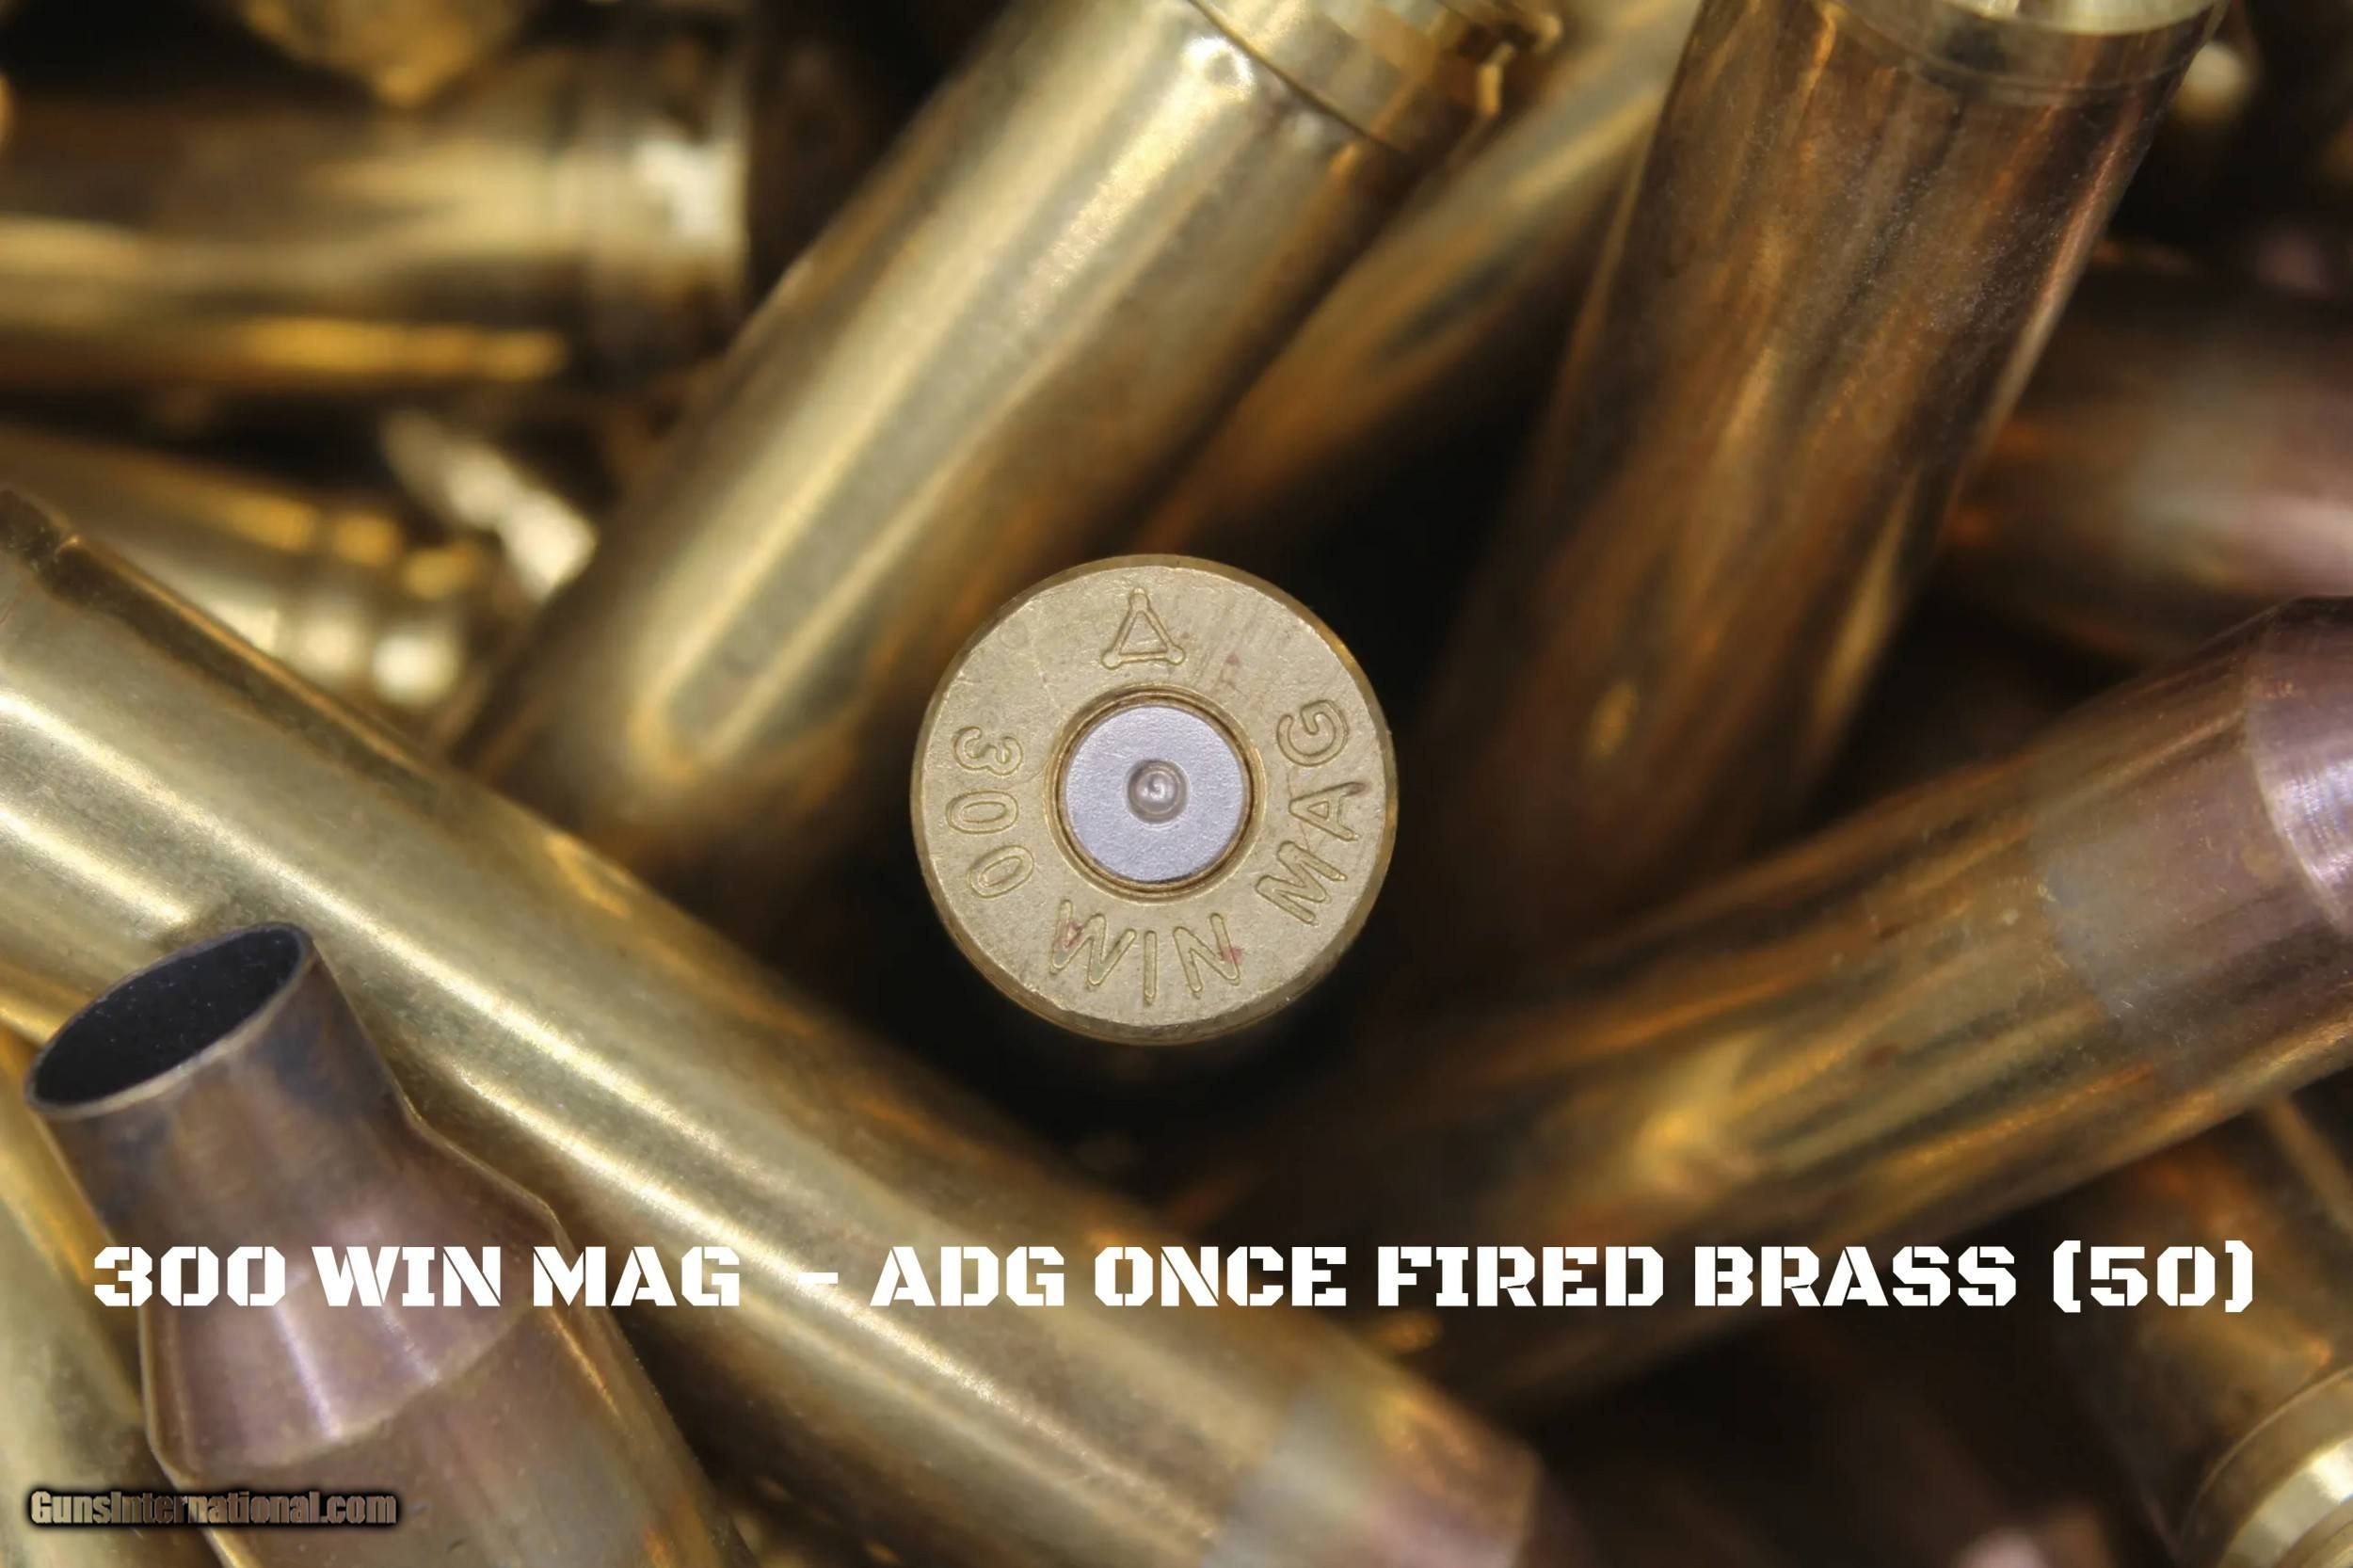 https://images.gunsinternational.com/listings_sub/acc_96679/gi_101886882/300-WIN-MAG-ADG-Once-Fired-Brass-and-40-50and-41_101886882_96679_DCC35E7D2E689451.jpg